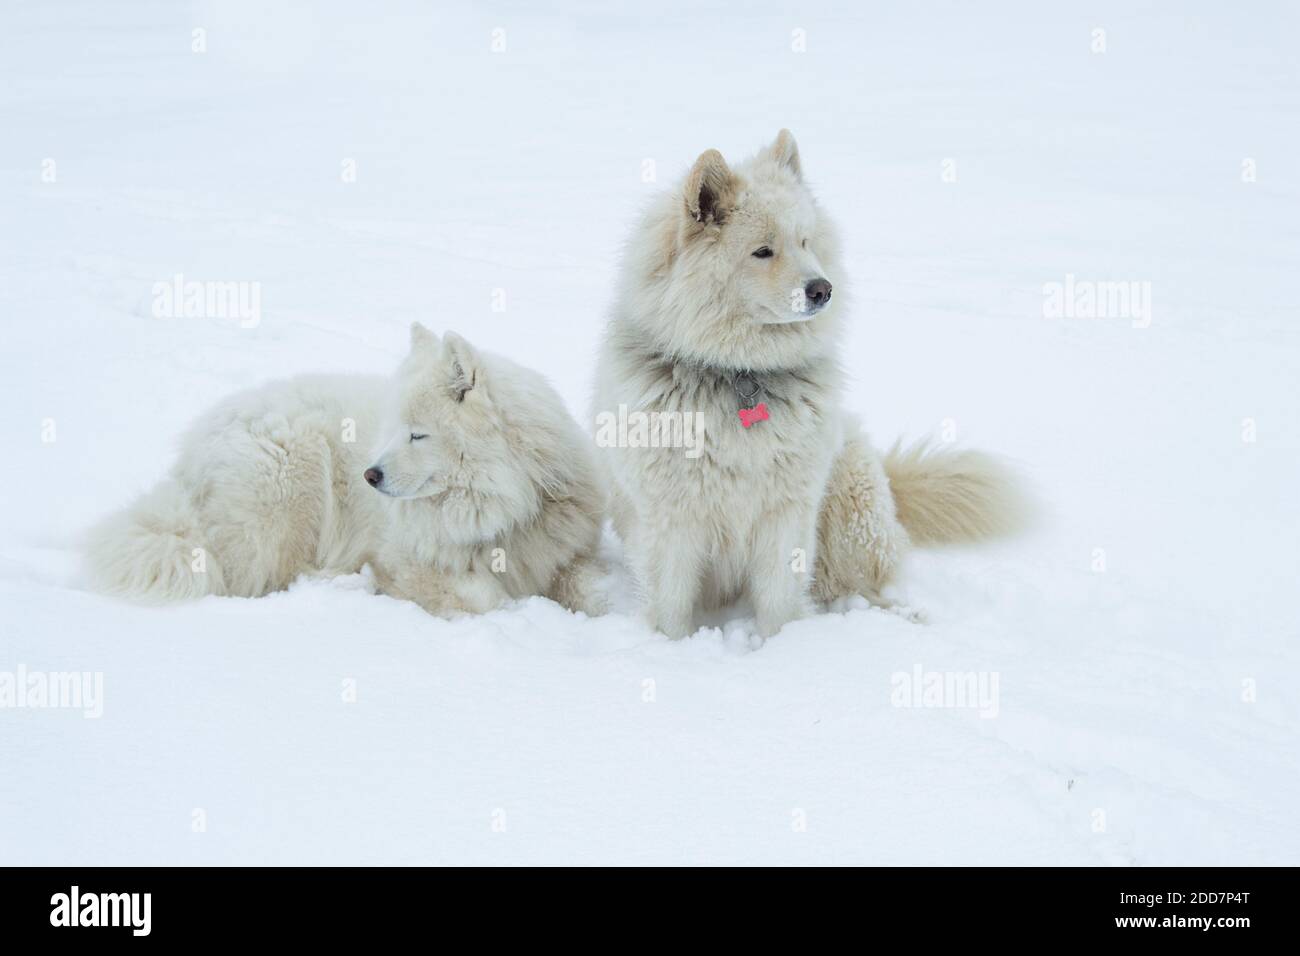 Two white Samoyed dogs sit on the white snow and look in different directions. Stock Photo